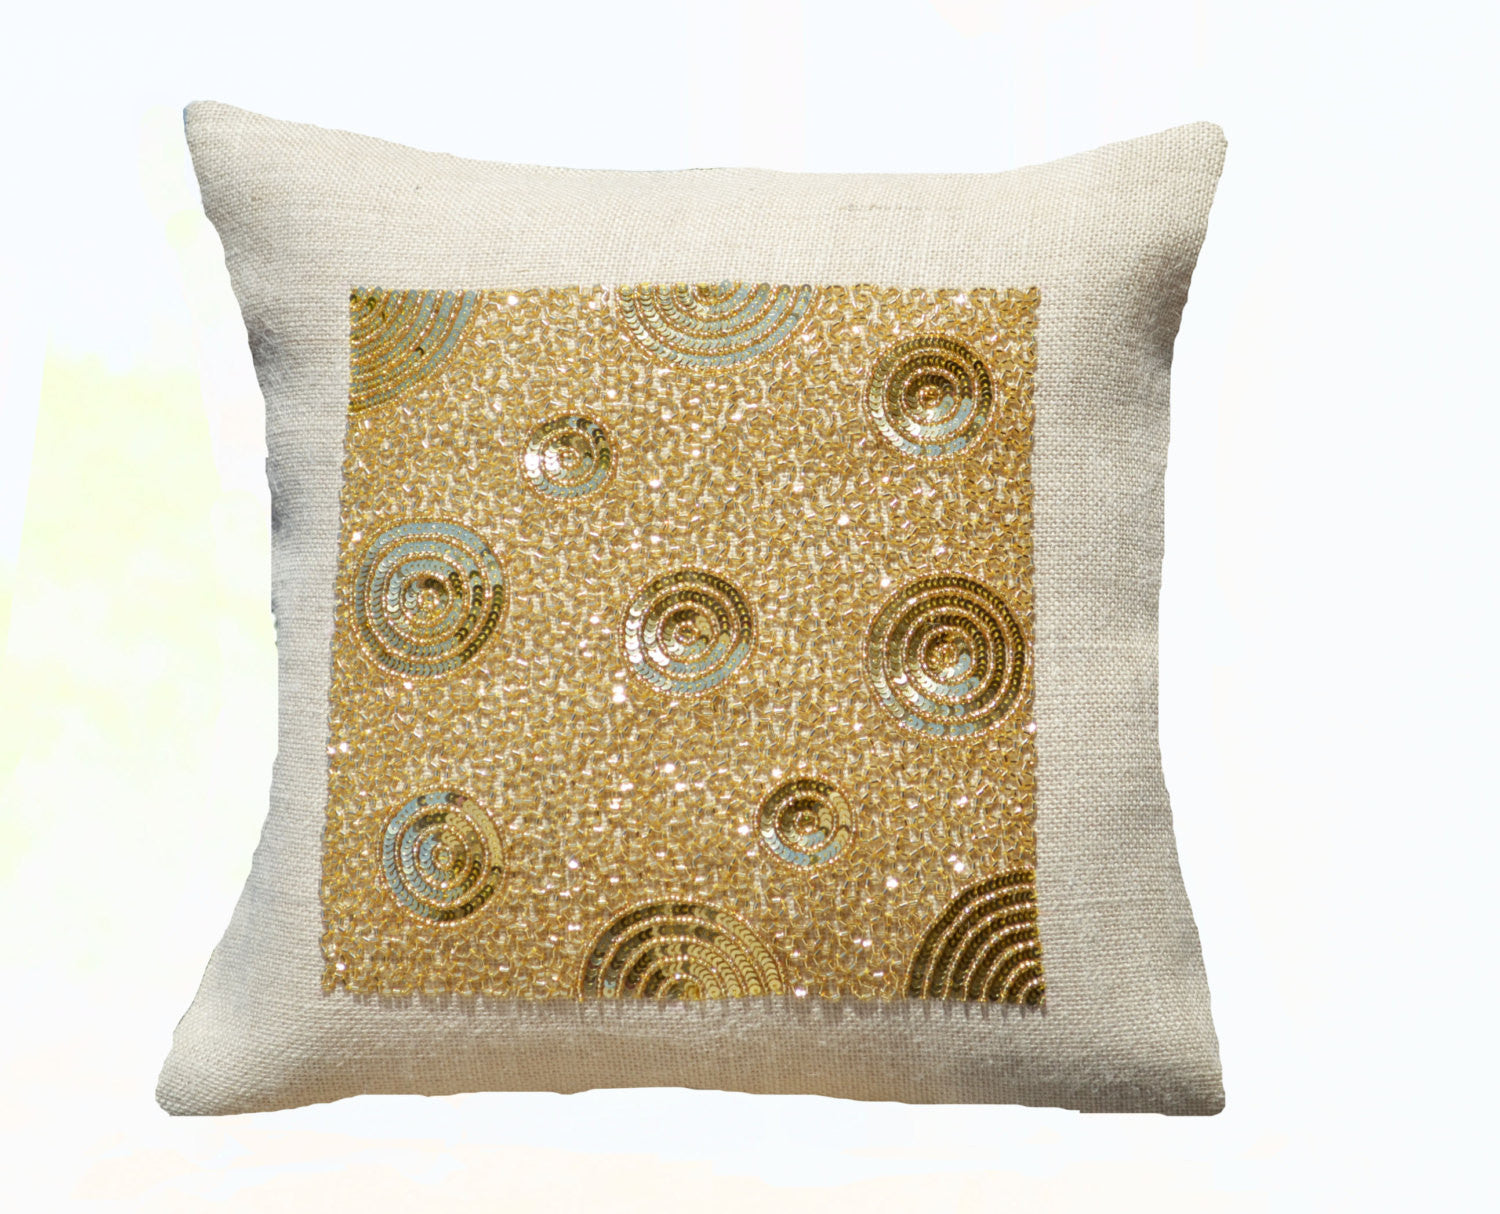 Handmade gold throw pillow with beaded sequin